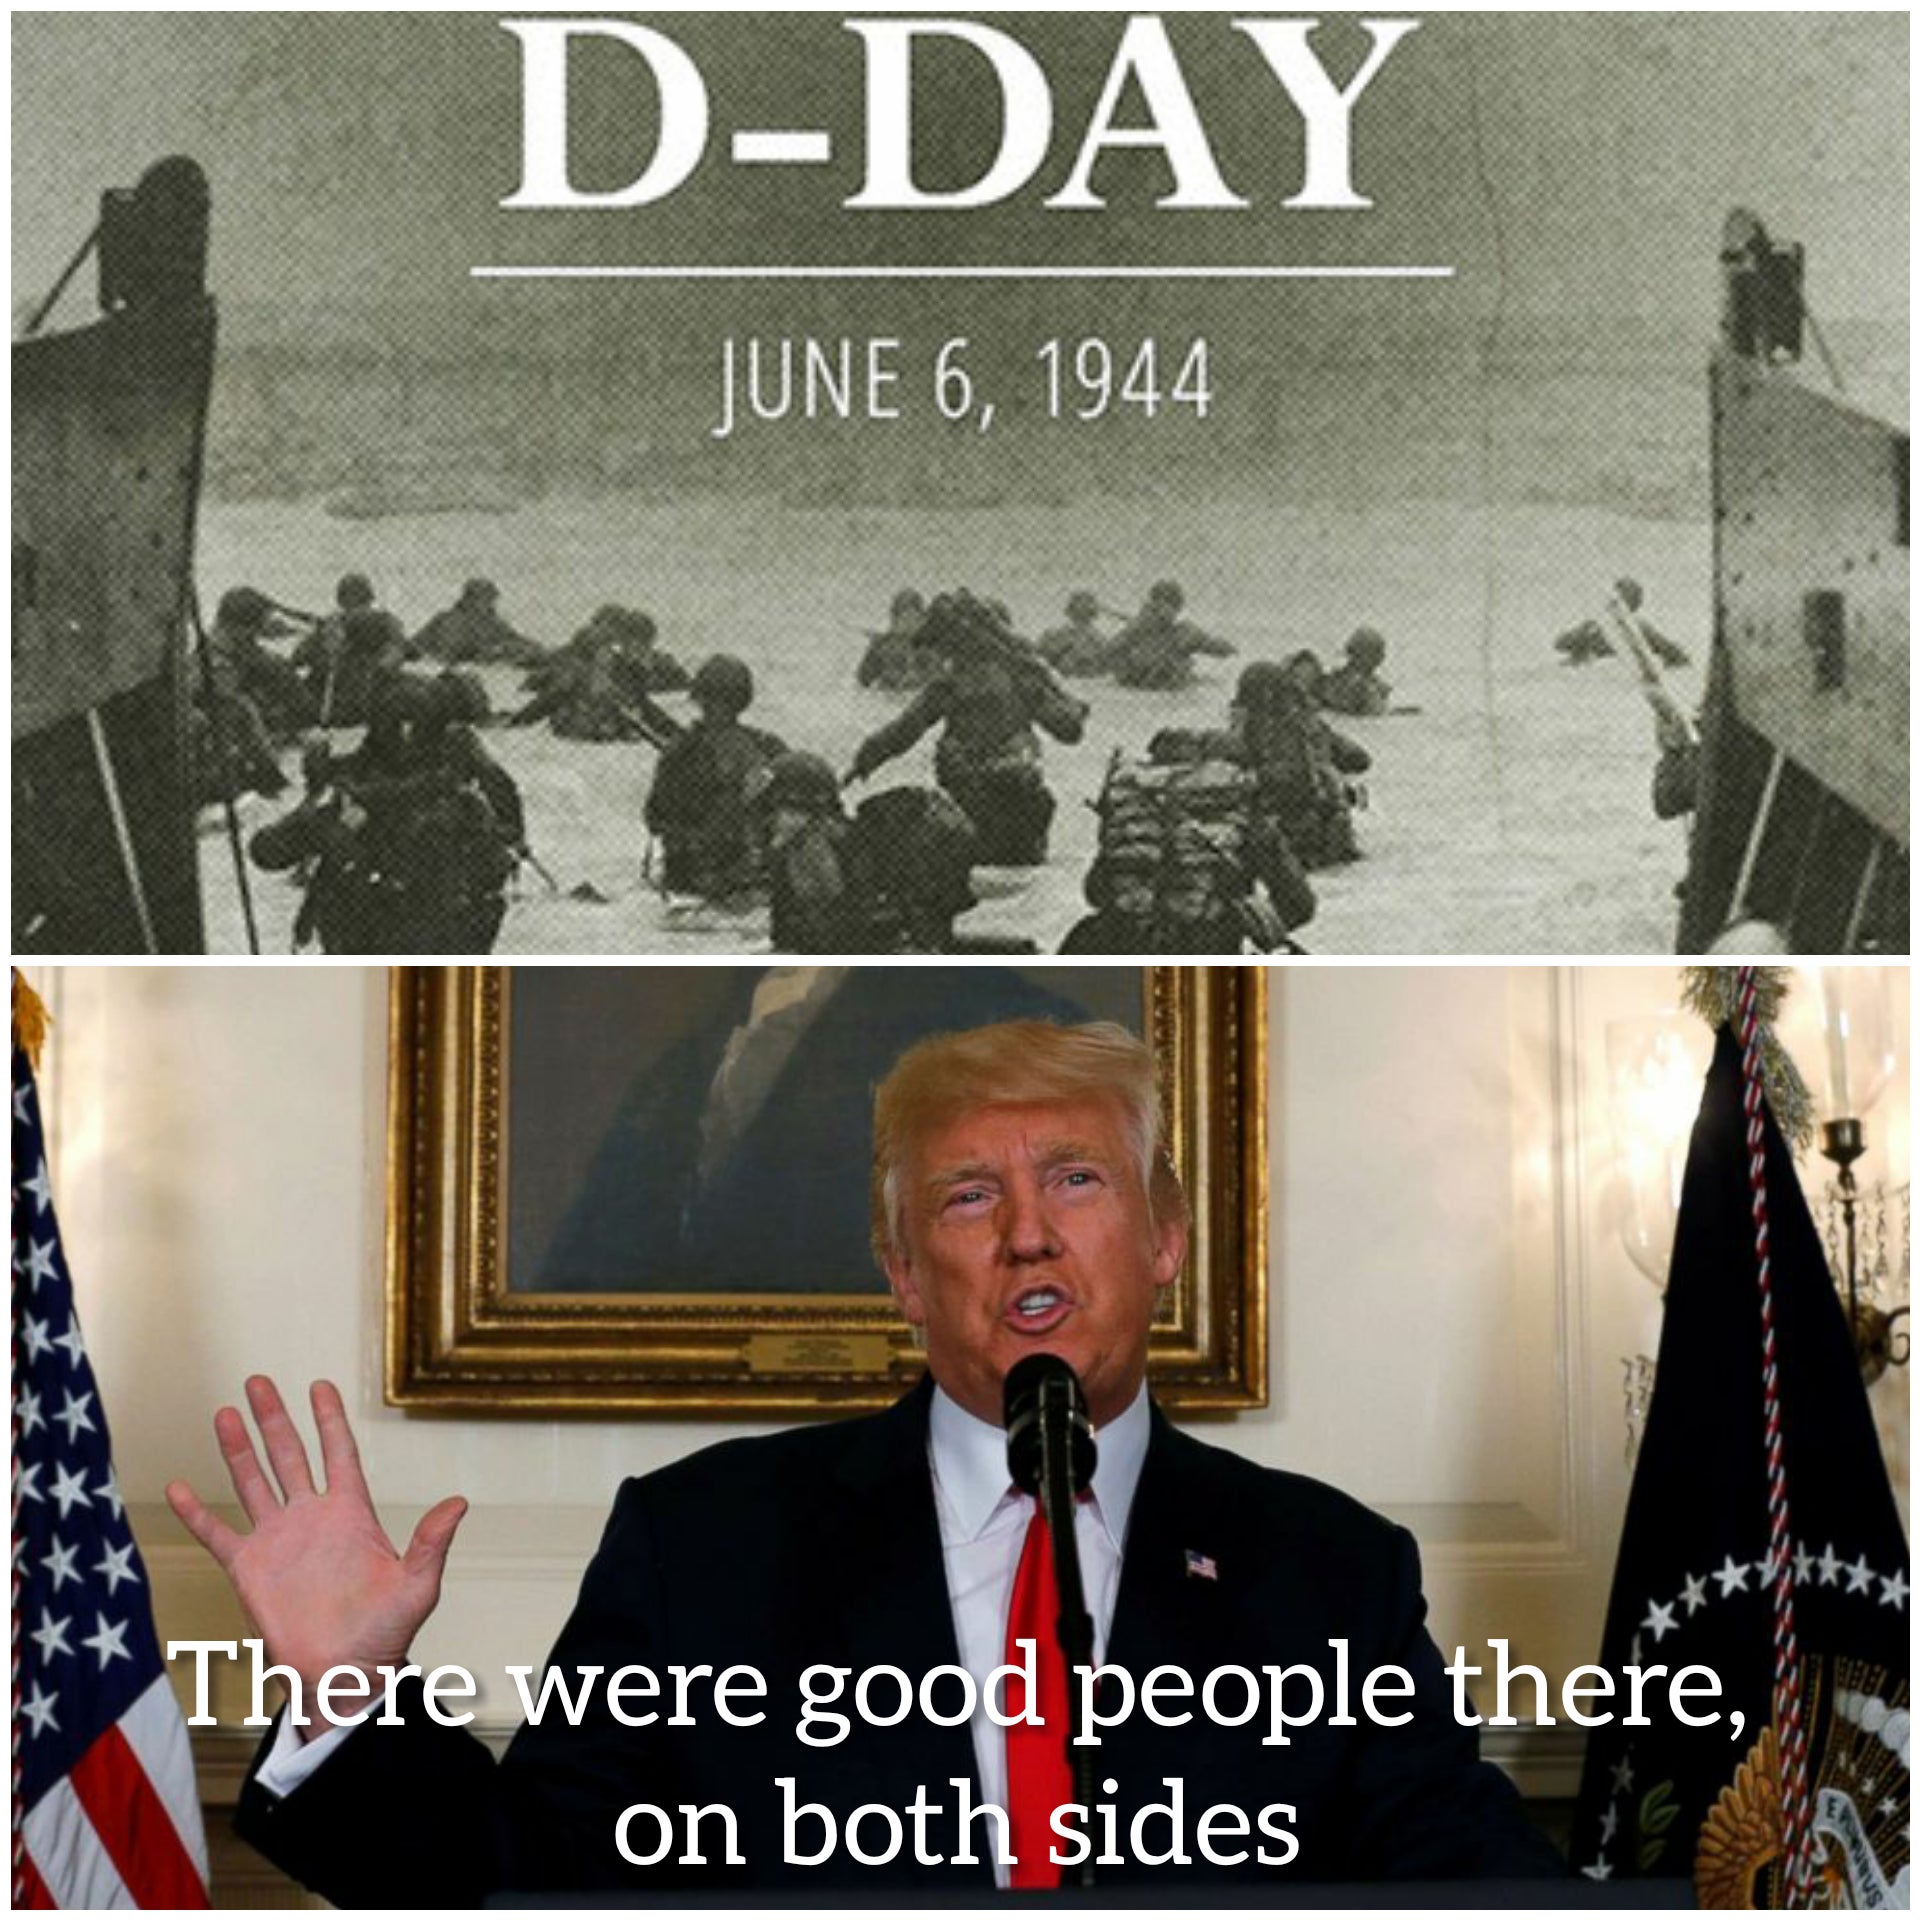 d day we remember - DDay There were good people there, on both sides